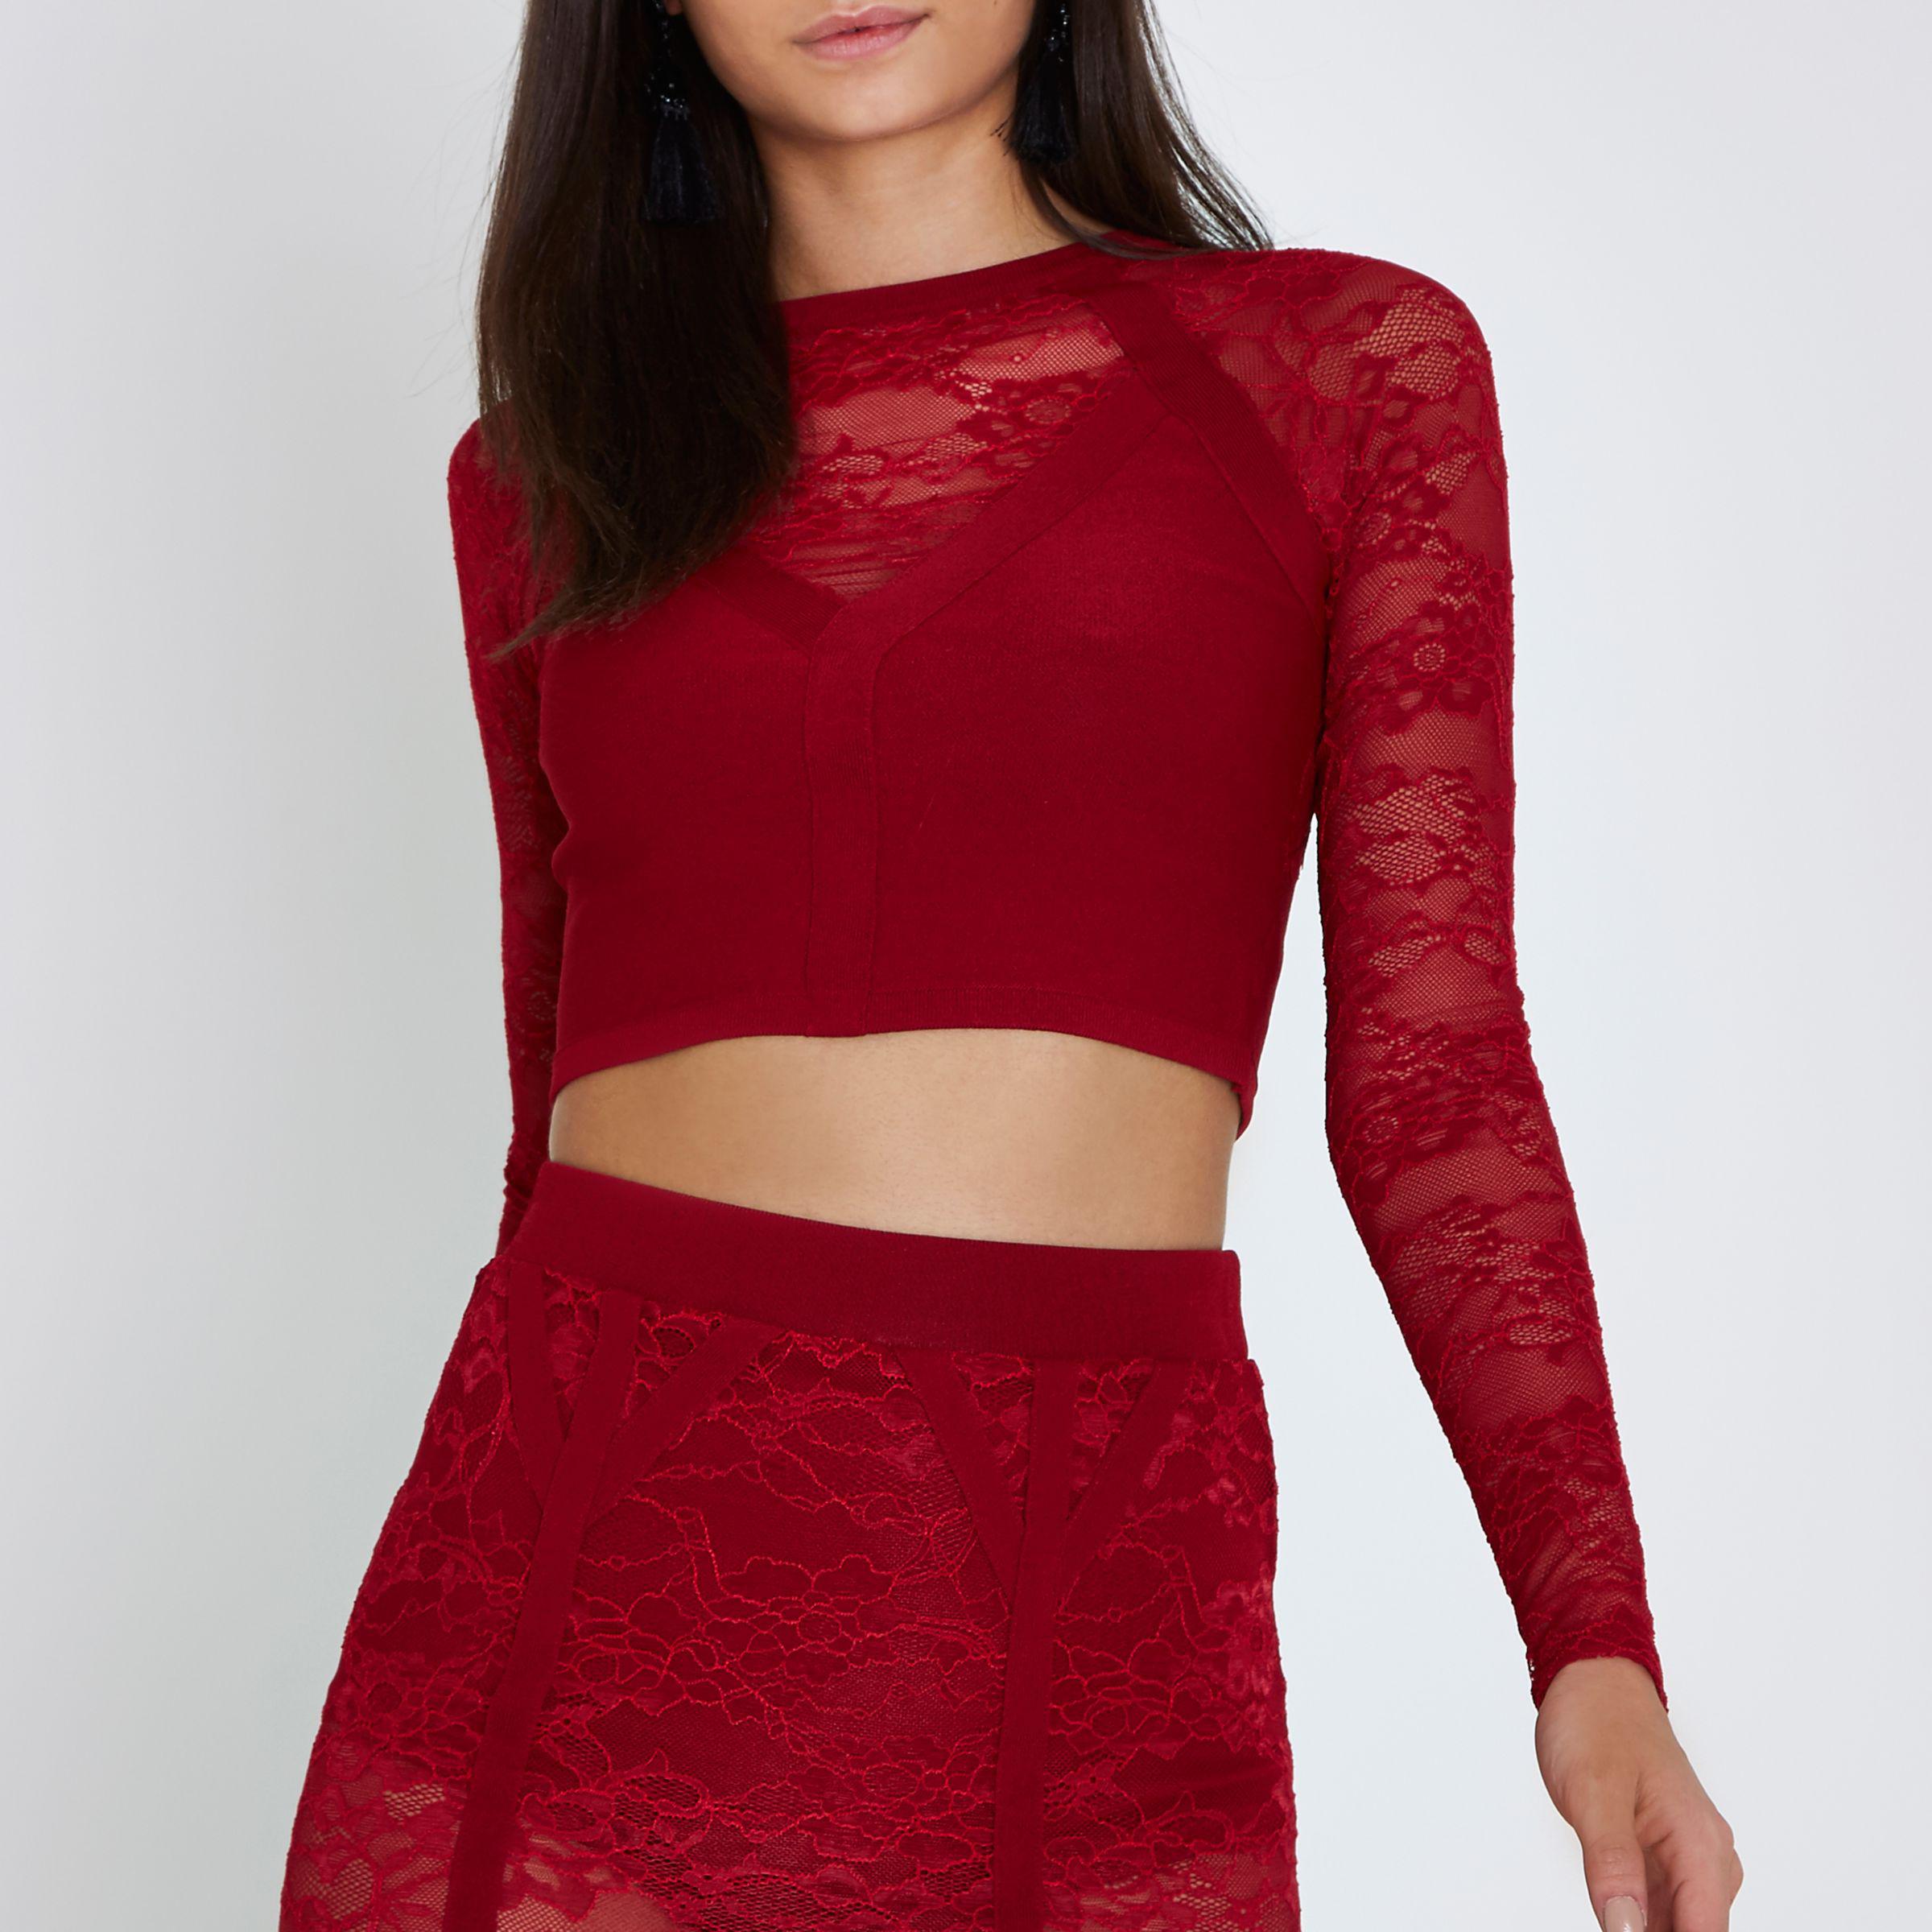 River Island Lace Long Sleeve Crop Top in Red - Lyst